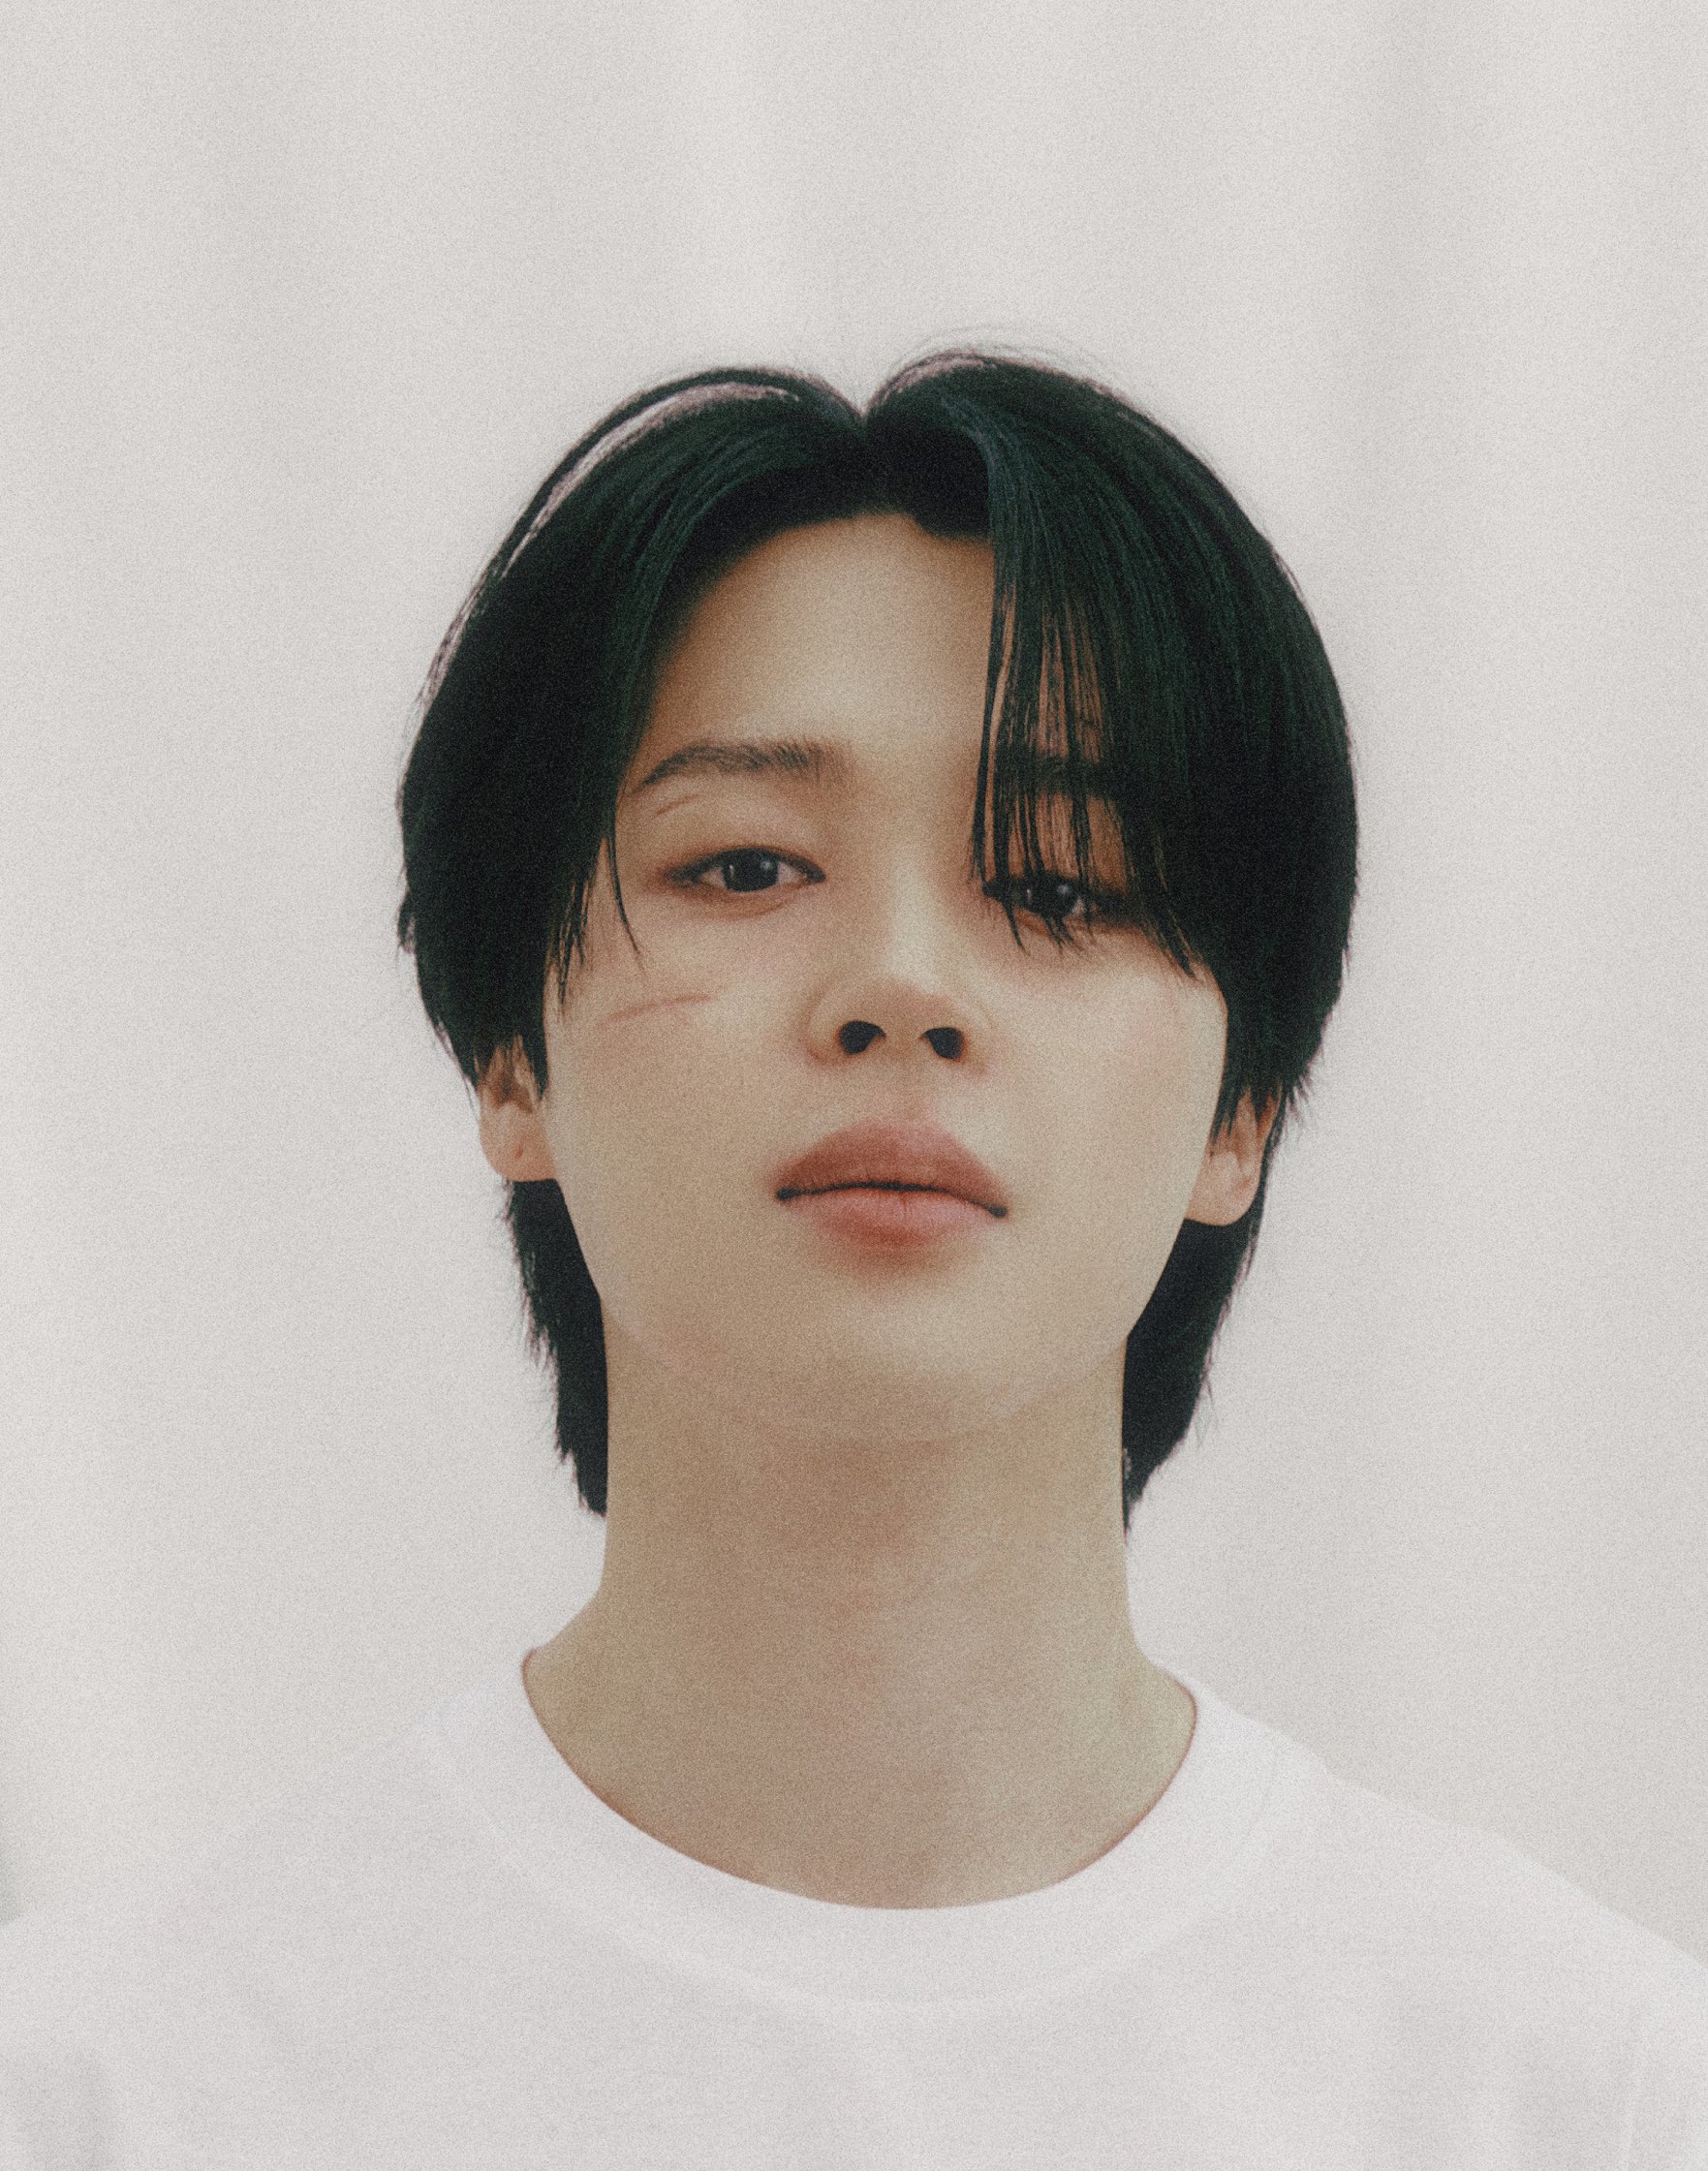 BTS Jimin Reveals New Concept Photos for Upcoming Solo "FACE" with Deep